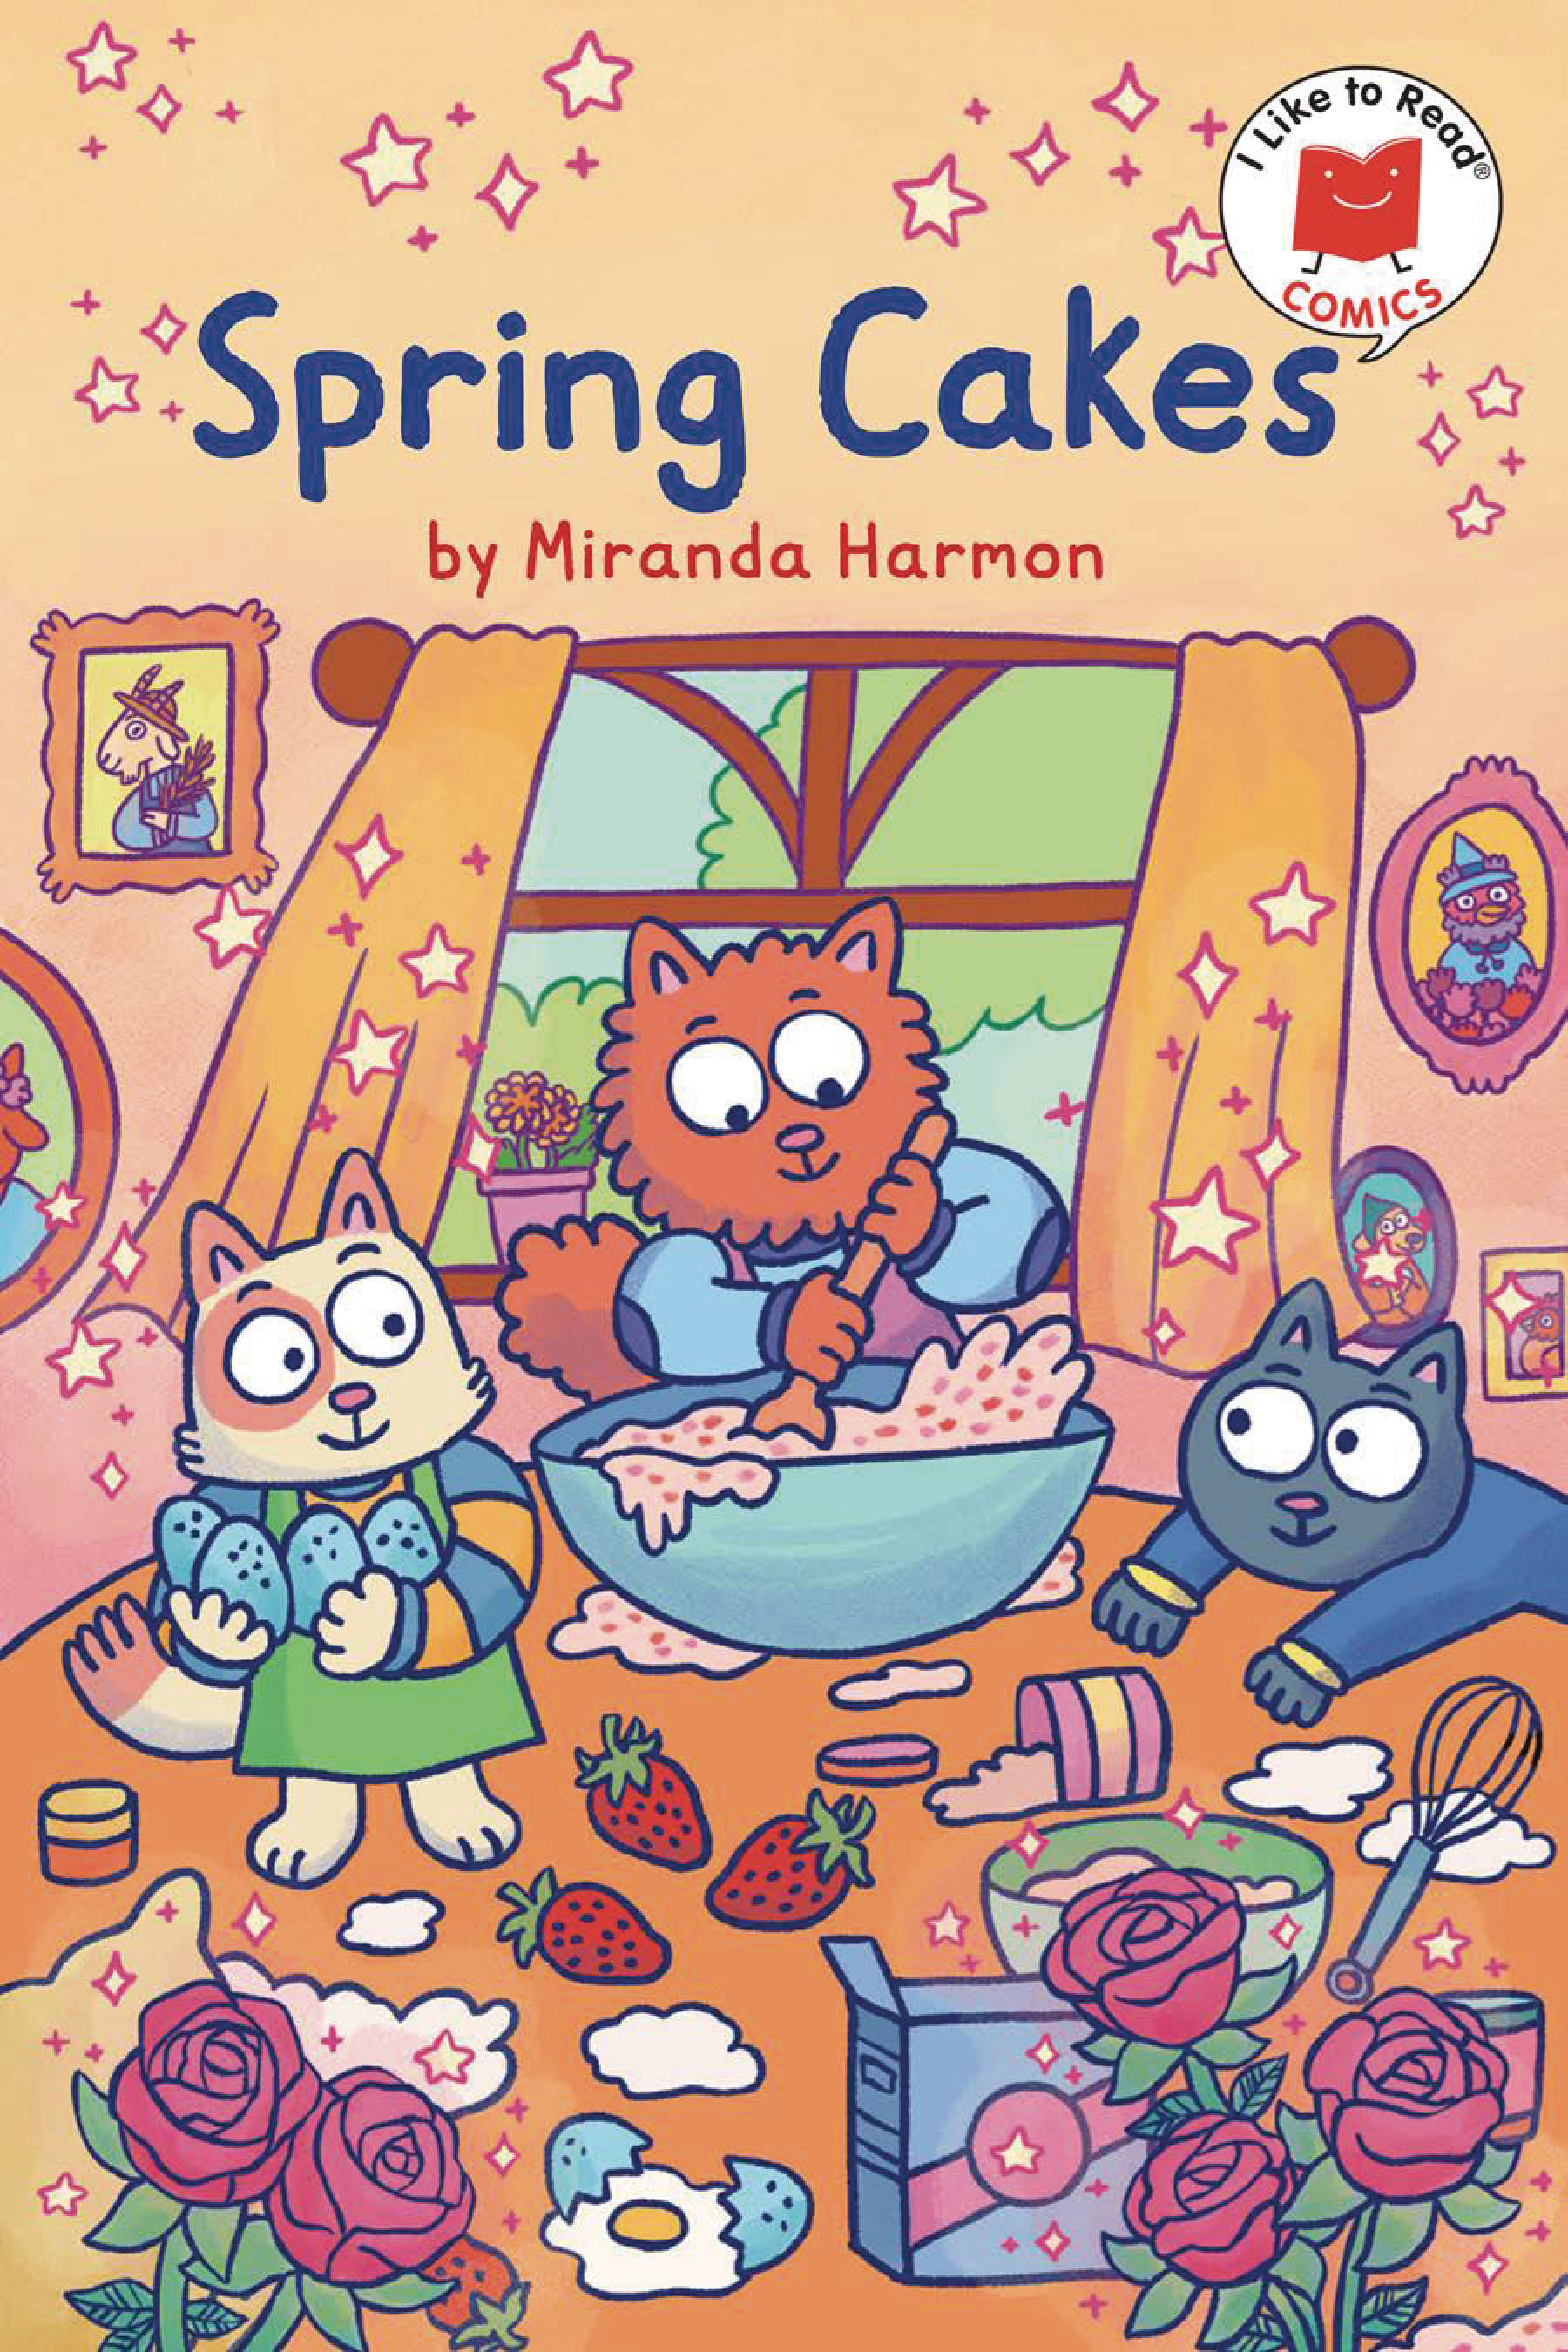 I Like To Read Comics Soft Cover Graphic Novel #2 Spring Cakes